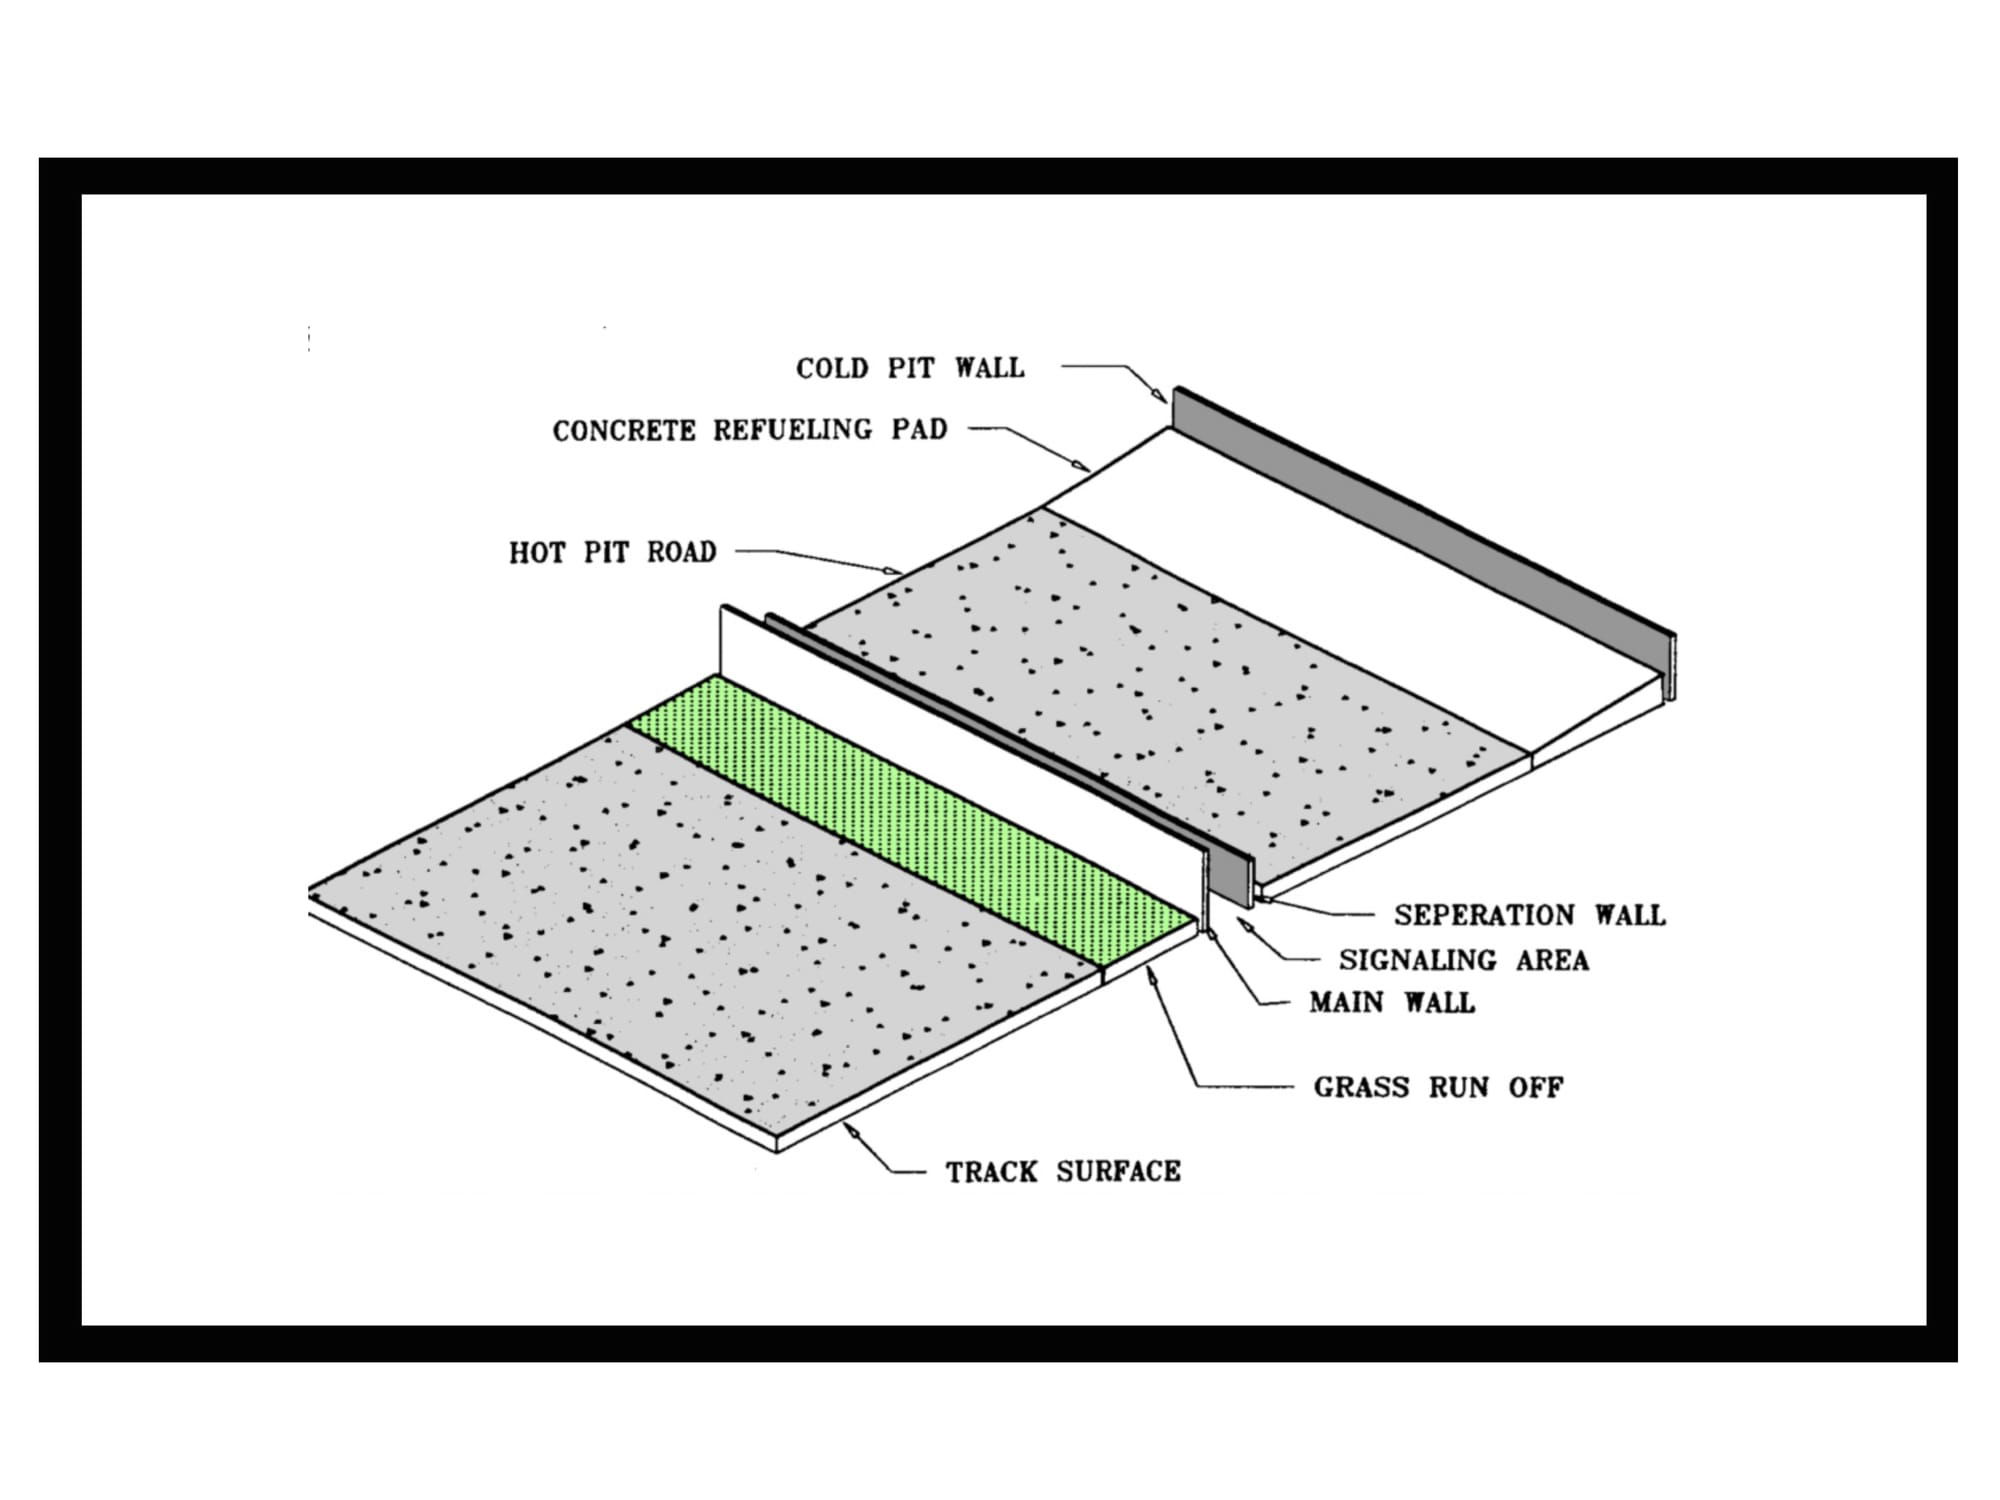 “Generic" Cross Section of Hot Pit Road and Race Track